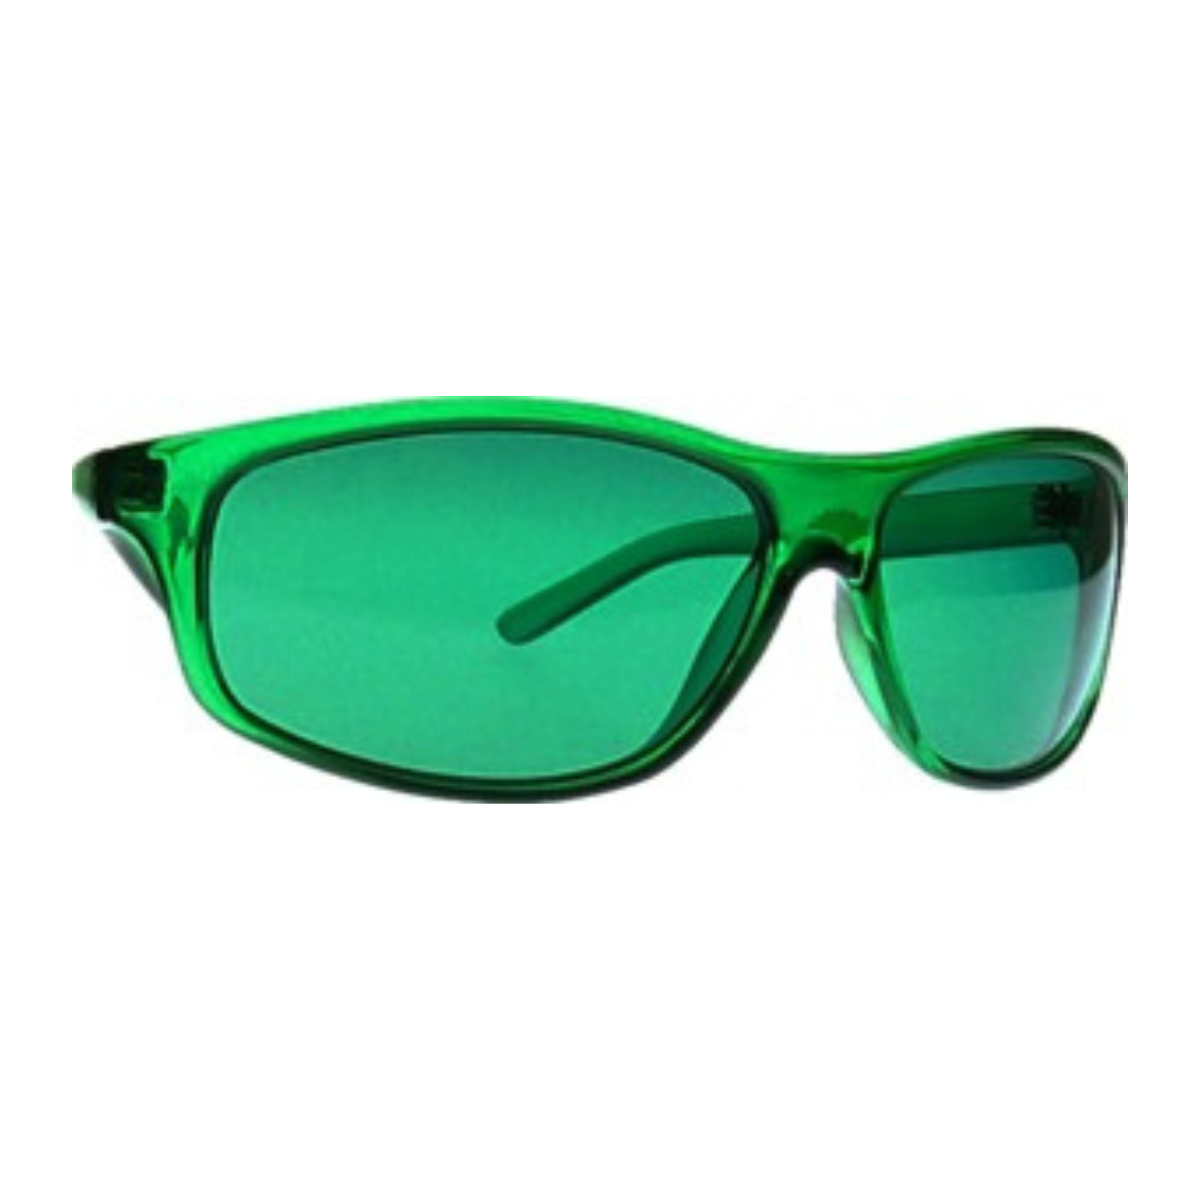 Colour Energy Therapy Glasses- Green